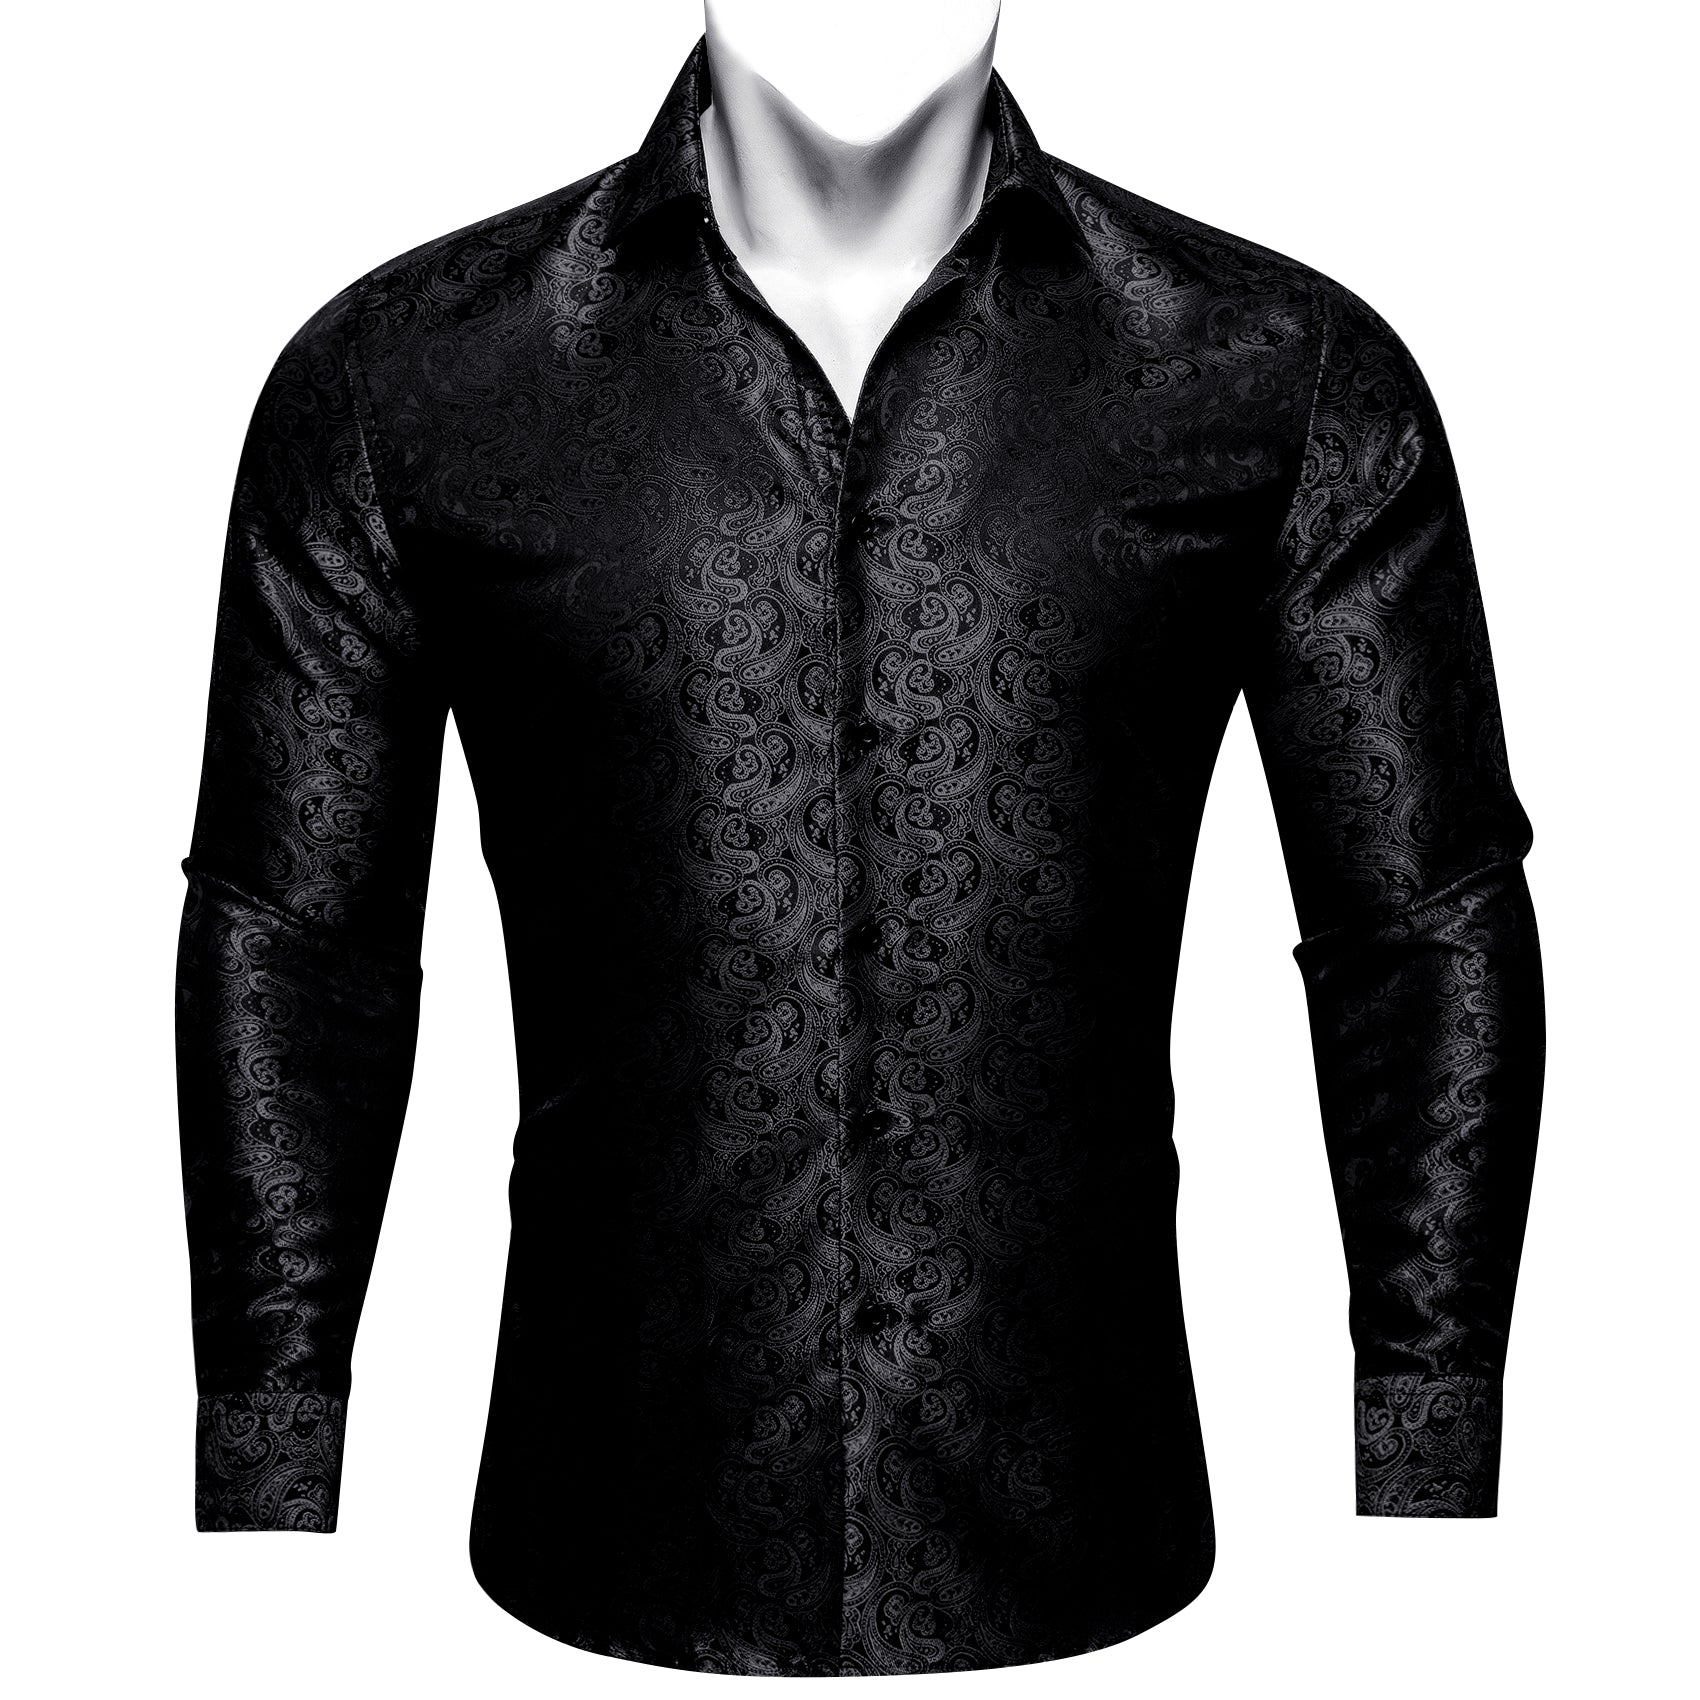 business casual shirt for men